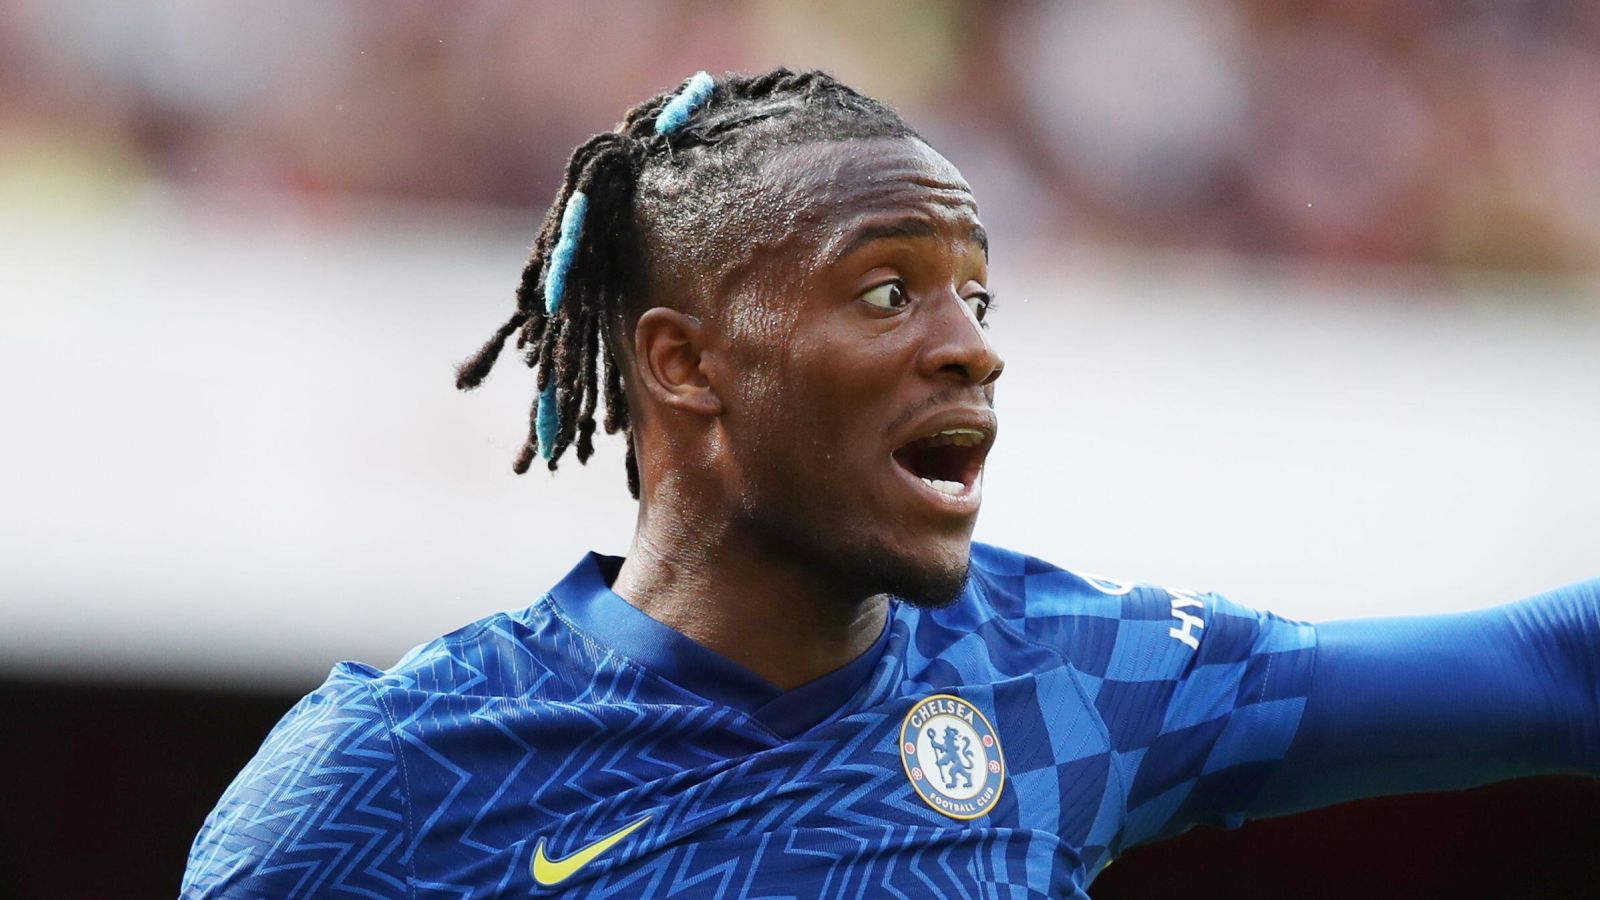 Michy Batshuayi Age, Salary, Net worth, Current Teams, Career, Height, and much more